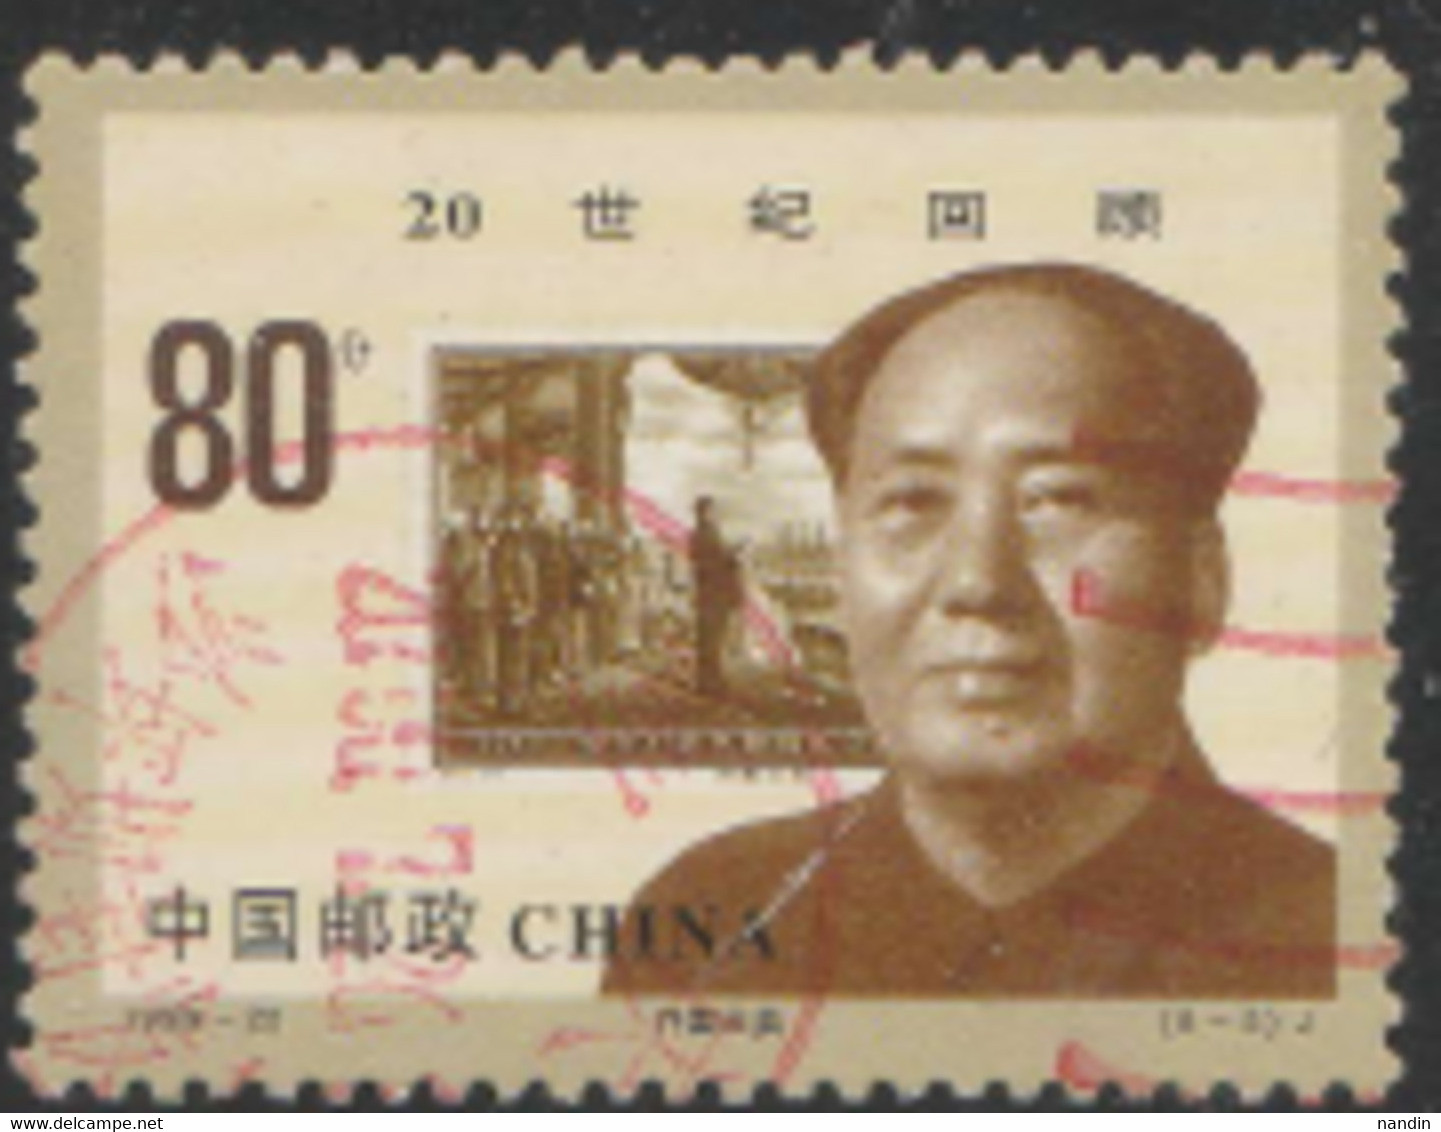 USED STAMP From CHINA Stamp  On MAO ZE DONG Issued On 31/12/1999,The Twentieth Century/Post & Philately/Stamps On Stamp - Oblitérés